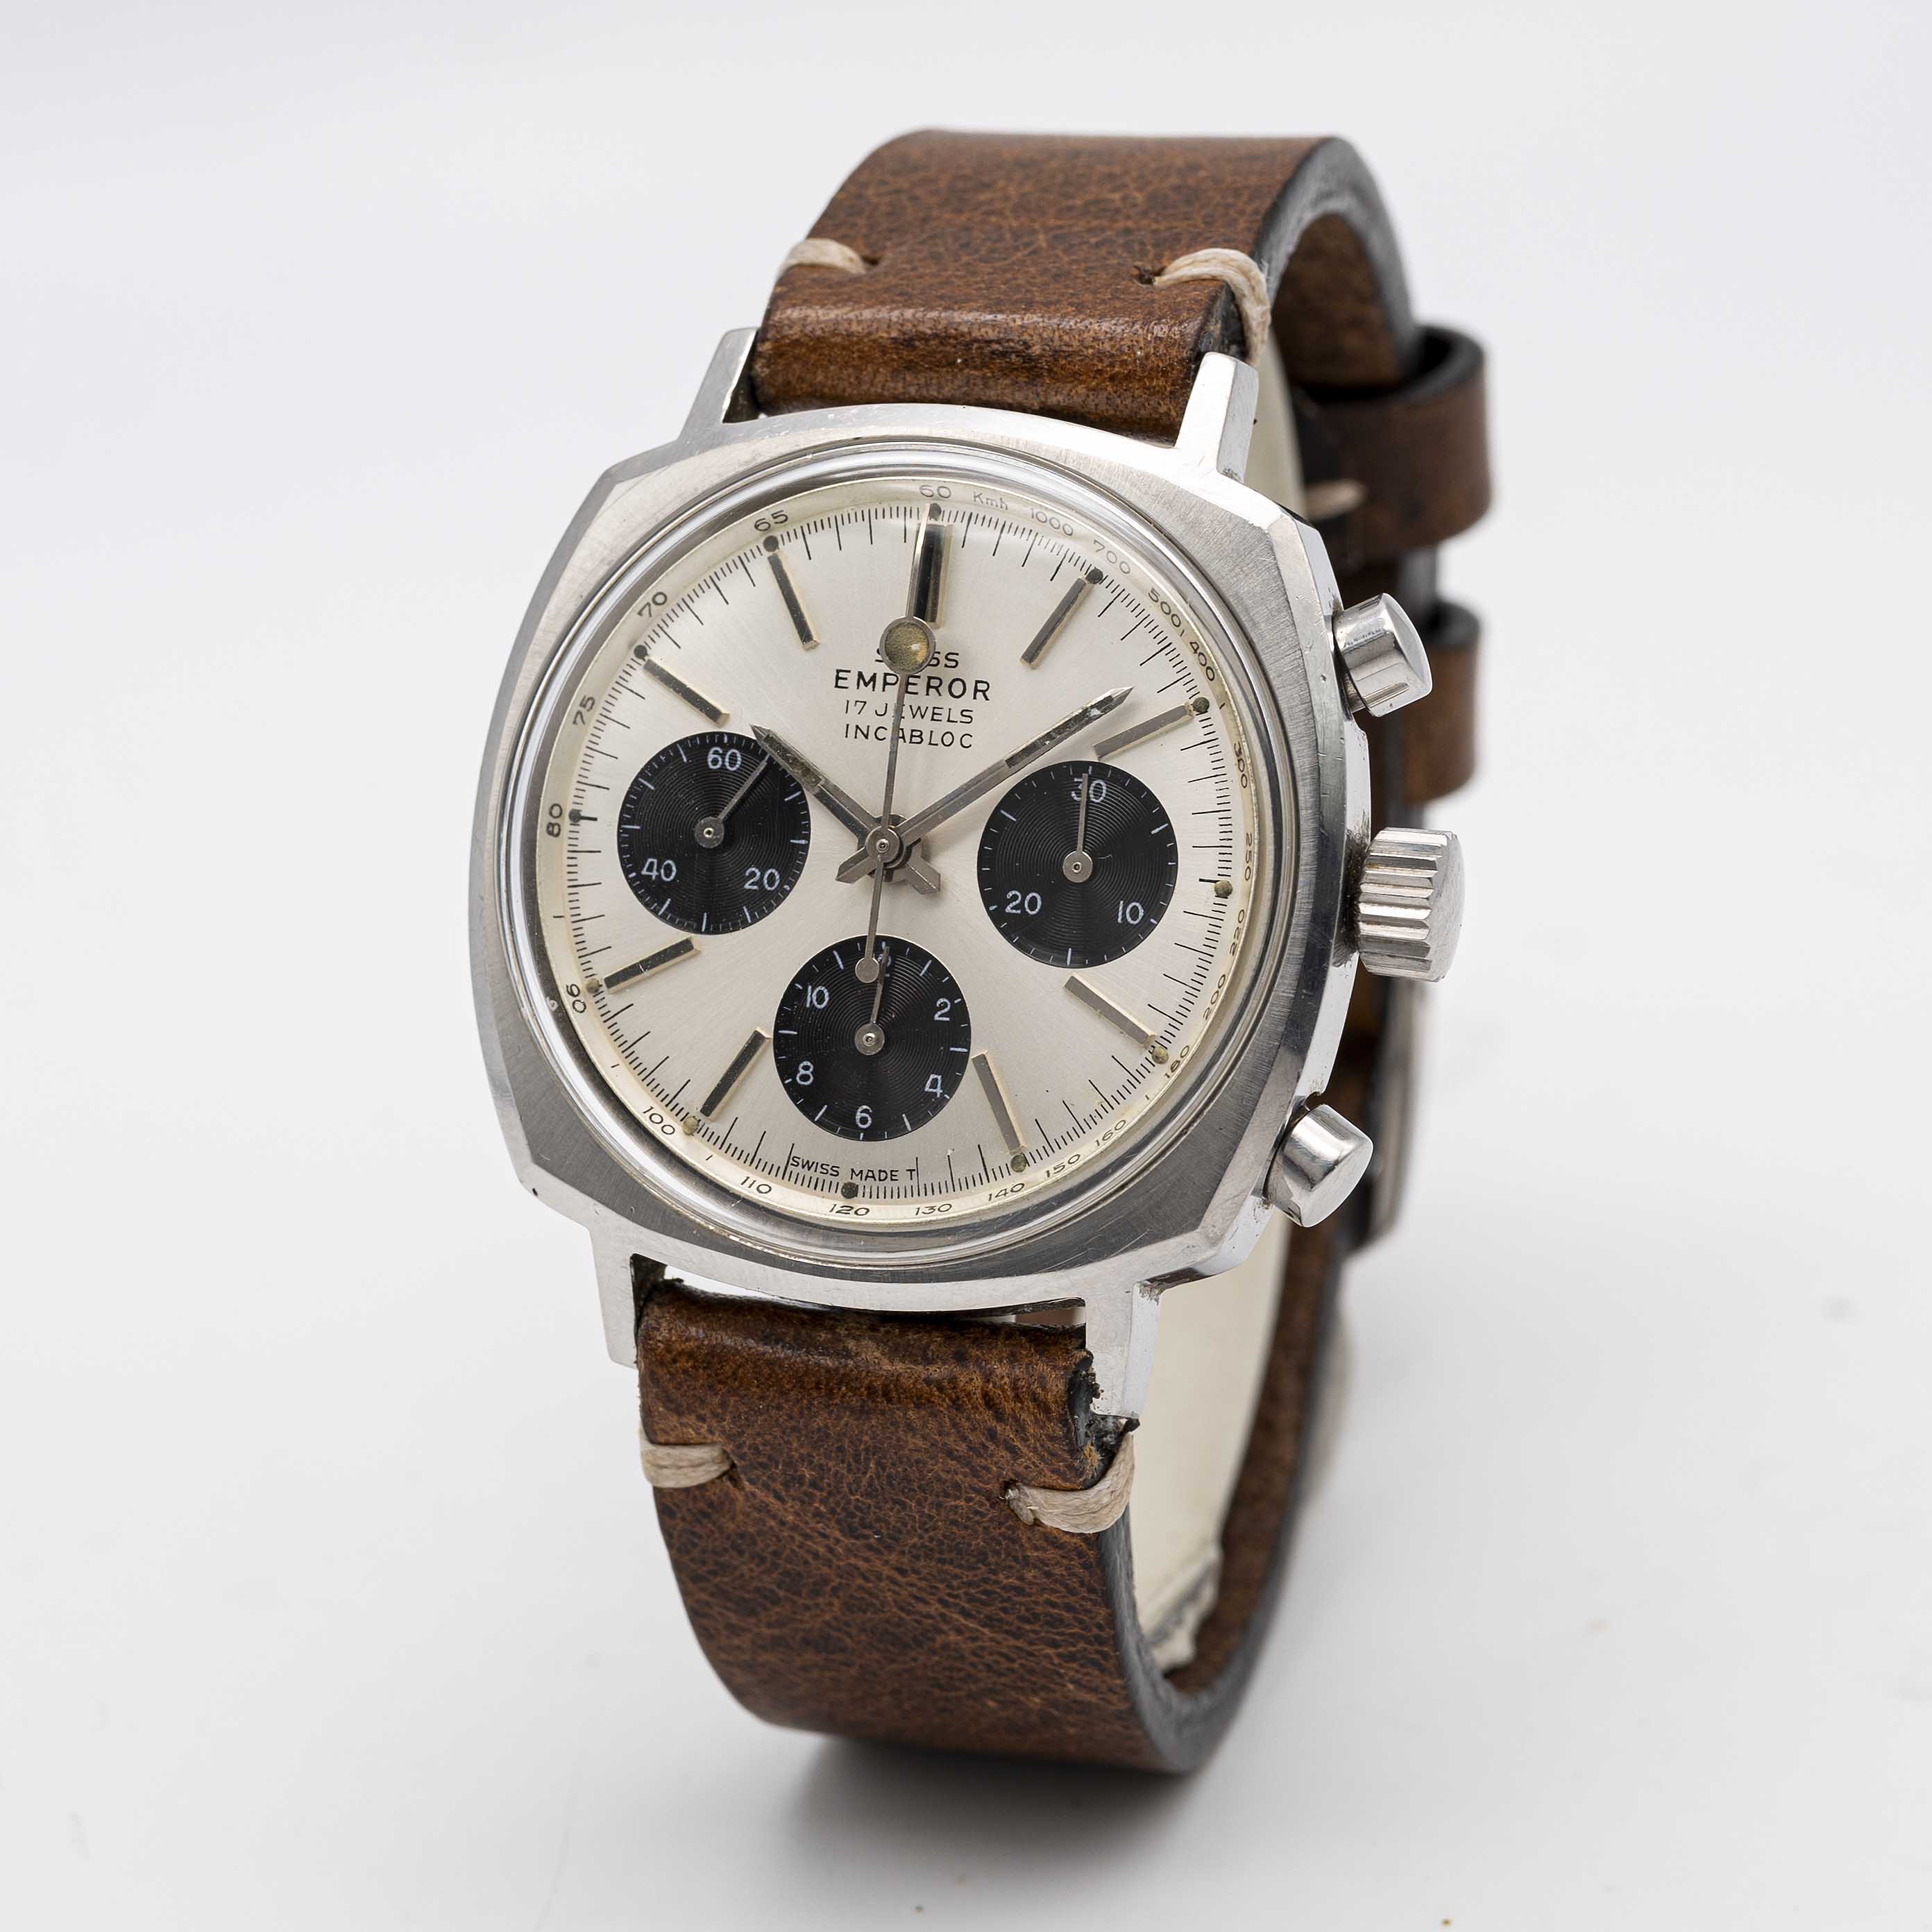 A GENTLEMAN'S STAINLESS STEEL SWISS EMPEROR CAMARO CHRONOGRAPH WRIST WATCH CIRCA 1970, WITH - Image 3 of 8